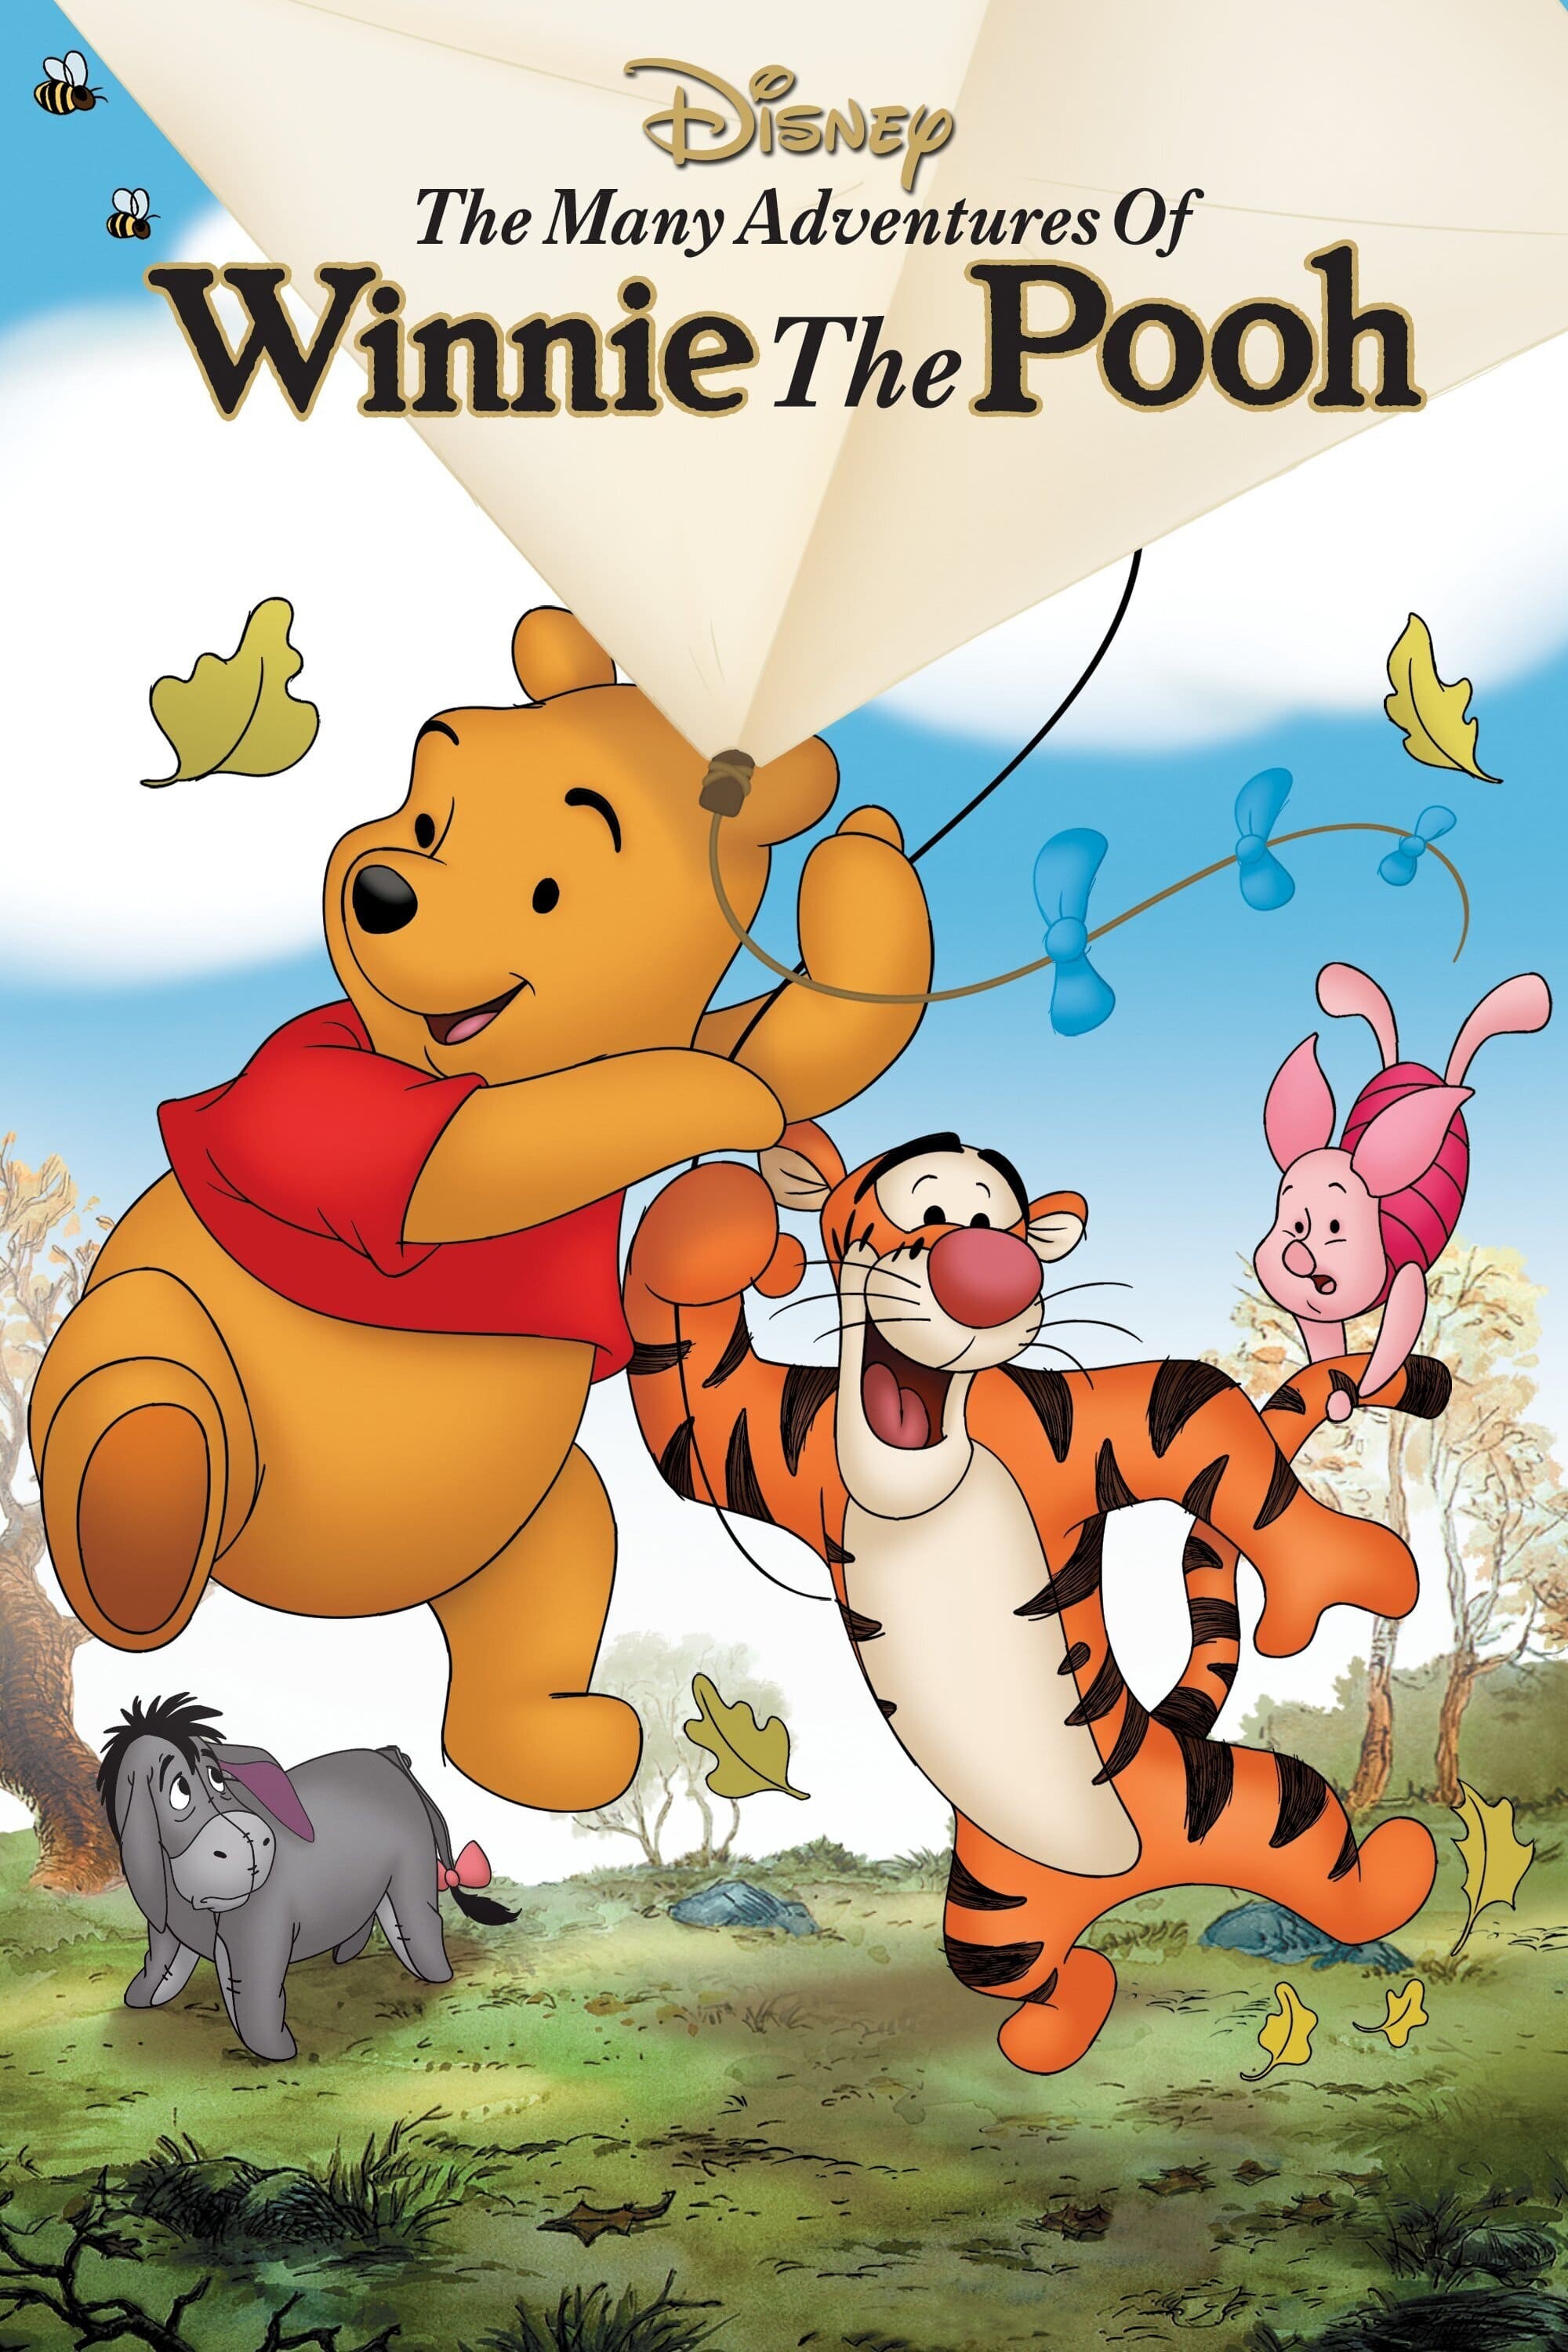 The Many Adventures of Winnie the Pooh: Kanga, Piglet, Owl, Rabbit, and Eeyore round out the menagerie in this trio of animated tales adapted from A.A. Milne's celebrated series of children's books. 2000x3000 HD Background.